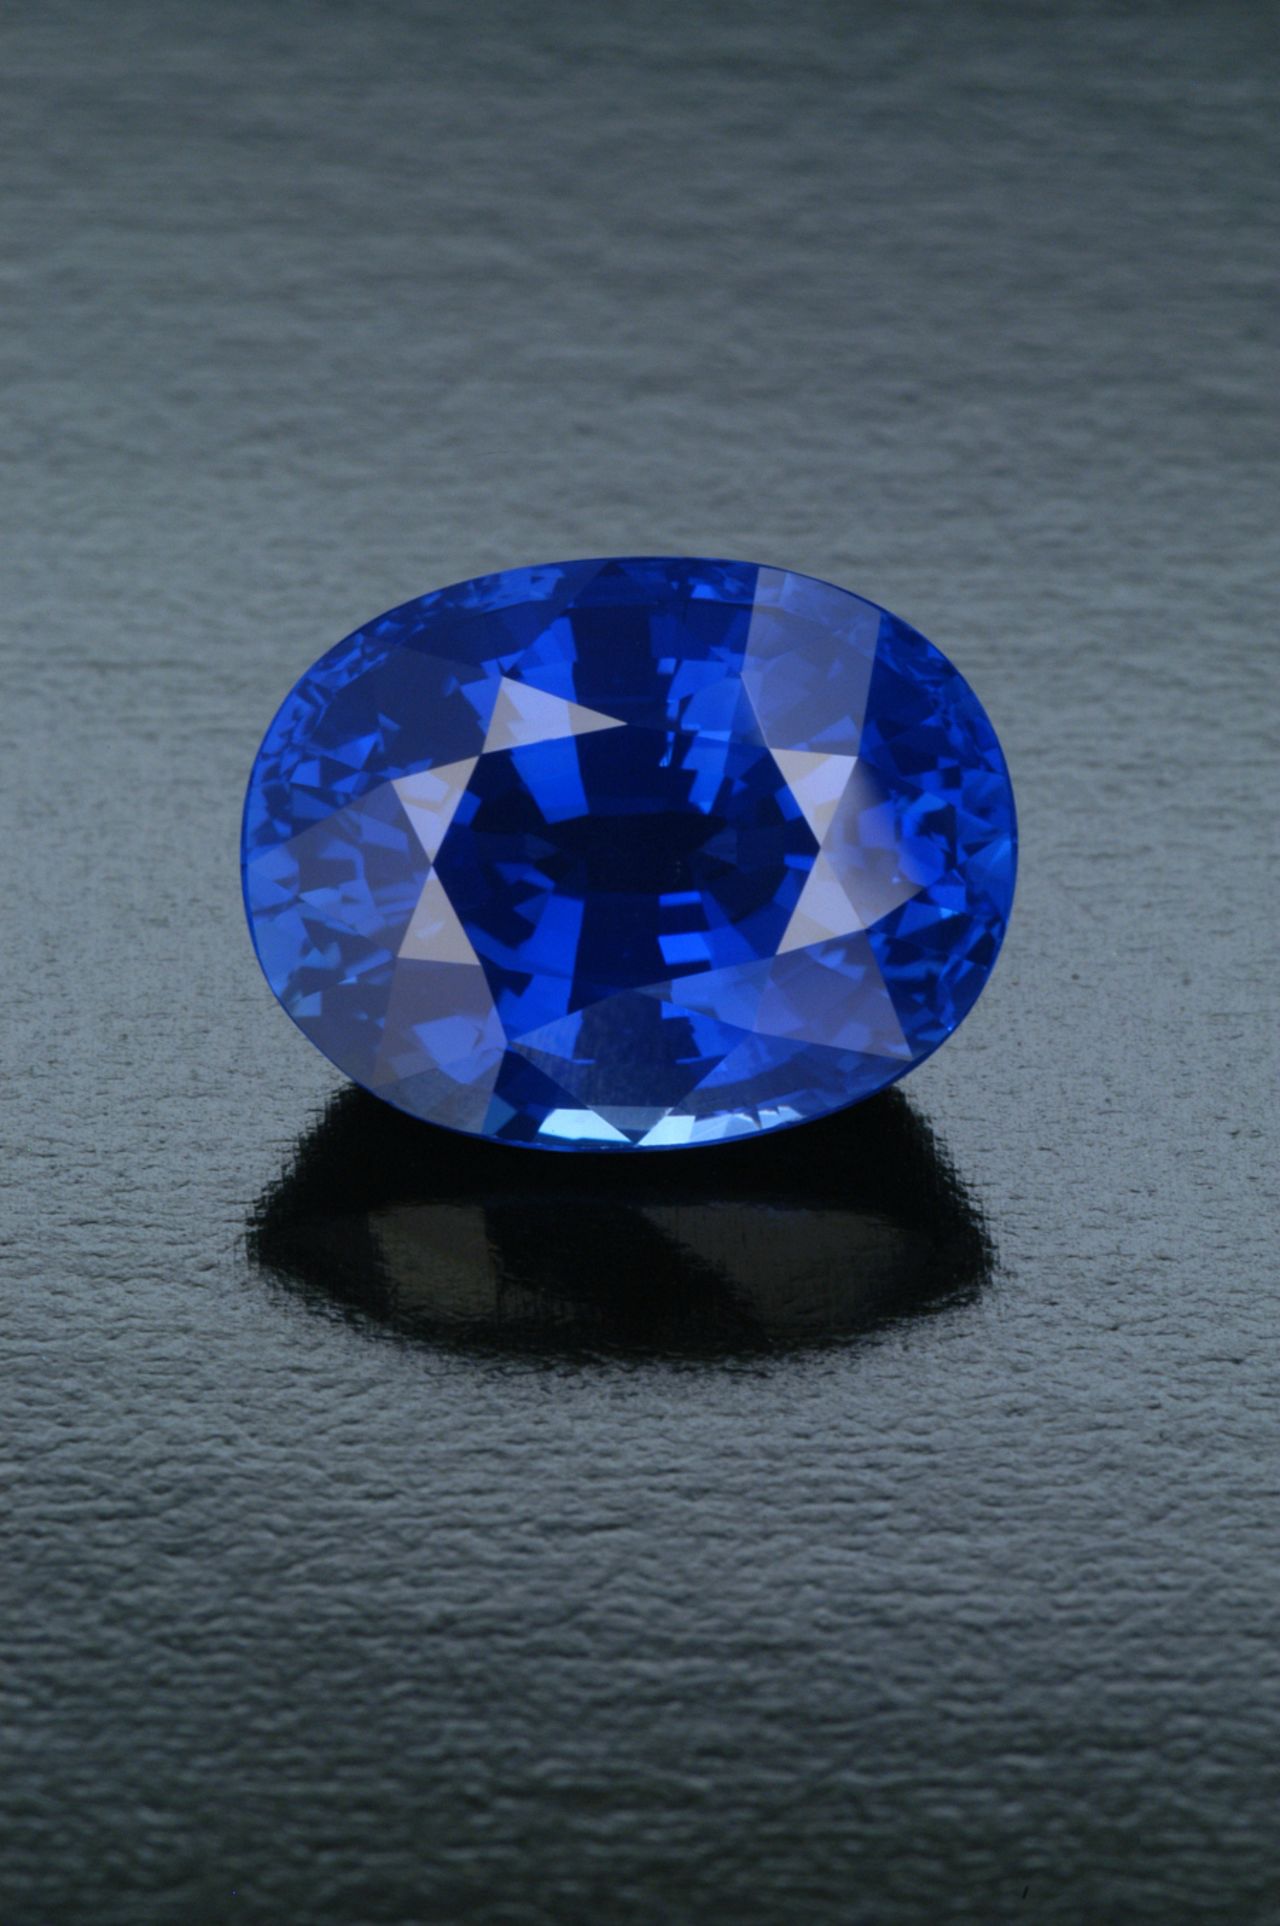 The sapphire is part of the conundrum family and comes in a variety of colors including violet, green, orange, pink and blue. <br /><br />Some of the finest are found in Kashmir, India, with African sources including Nigeria and Madagascar, becoming the leading sources today.